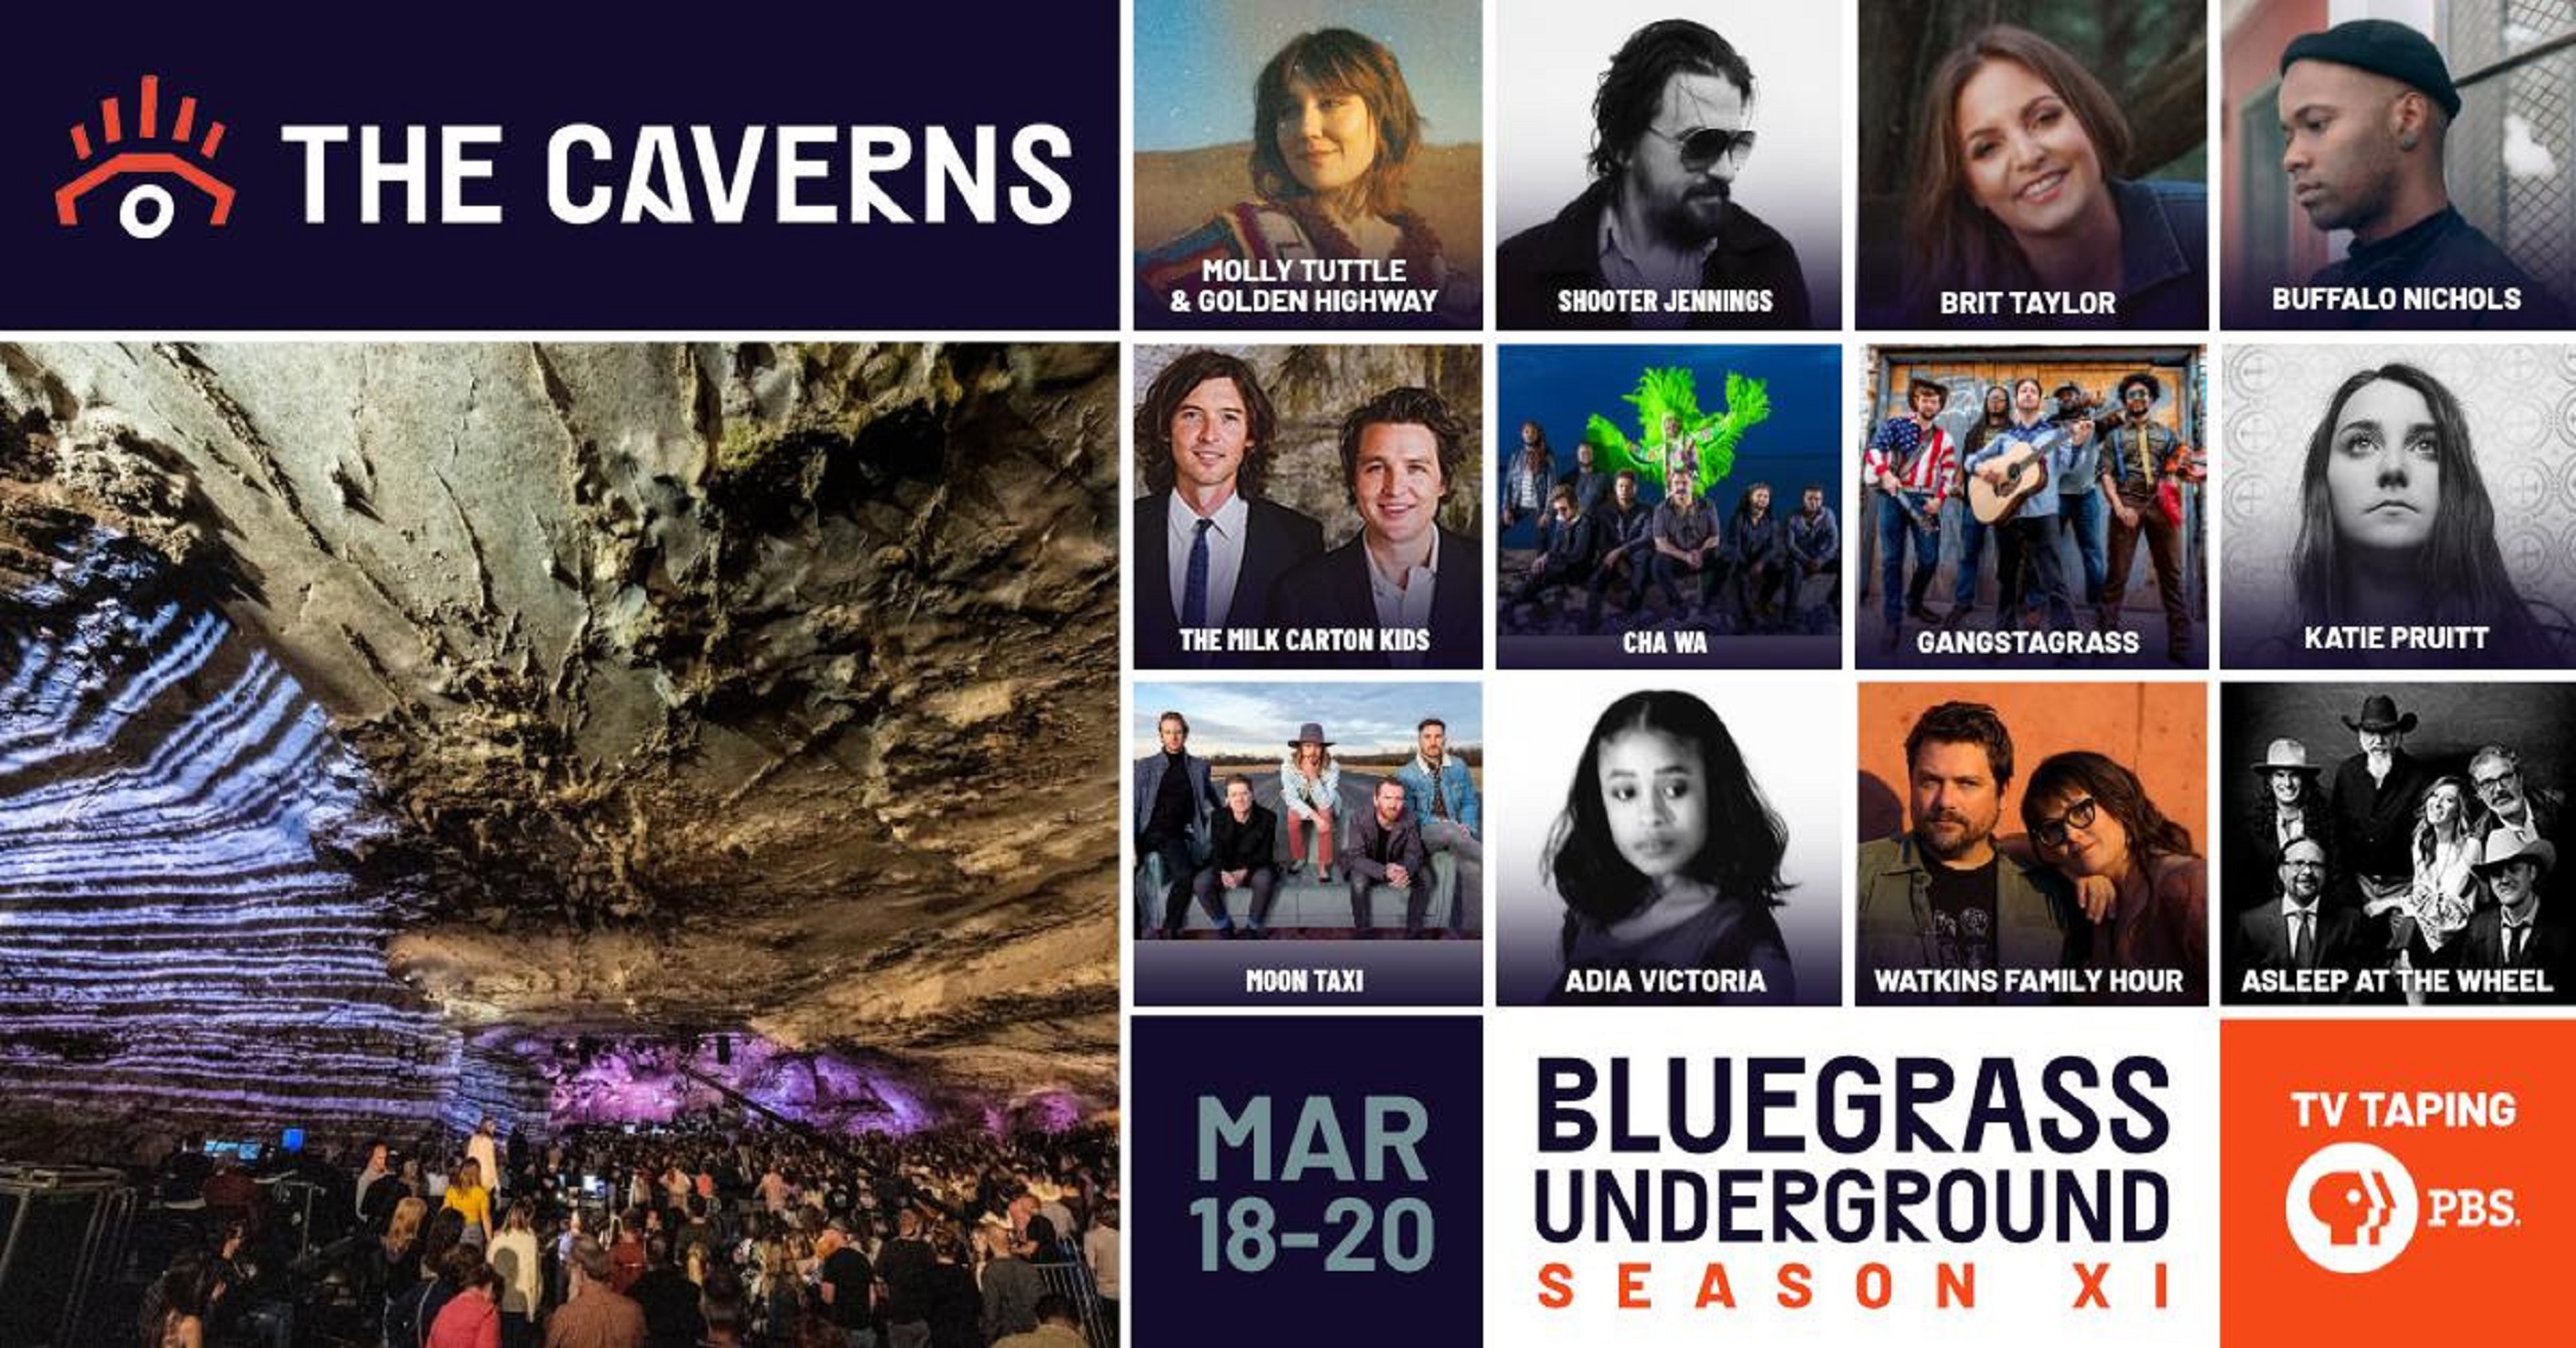 Bluegrass Underground PBS TV Taping Returns to The Caverns for Jam-Packed Subterranean Weekend